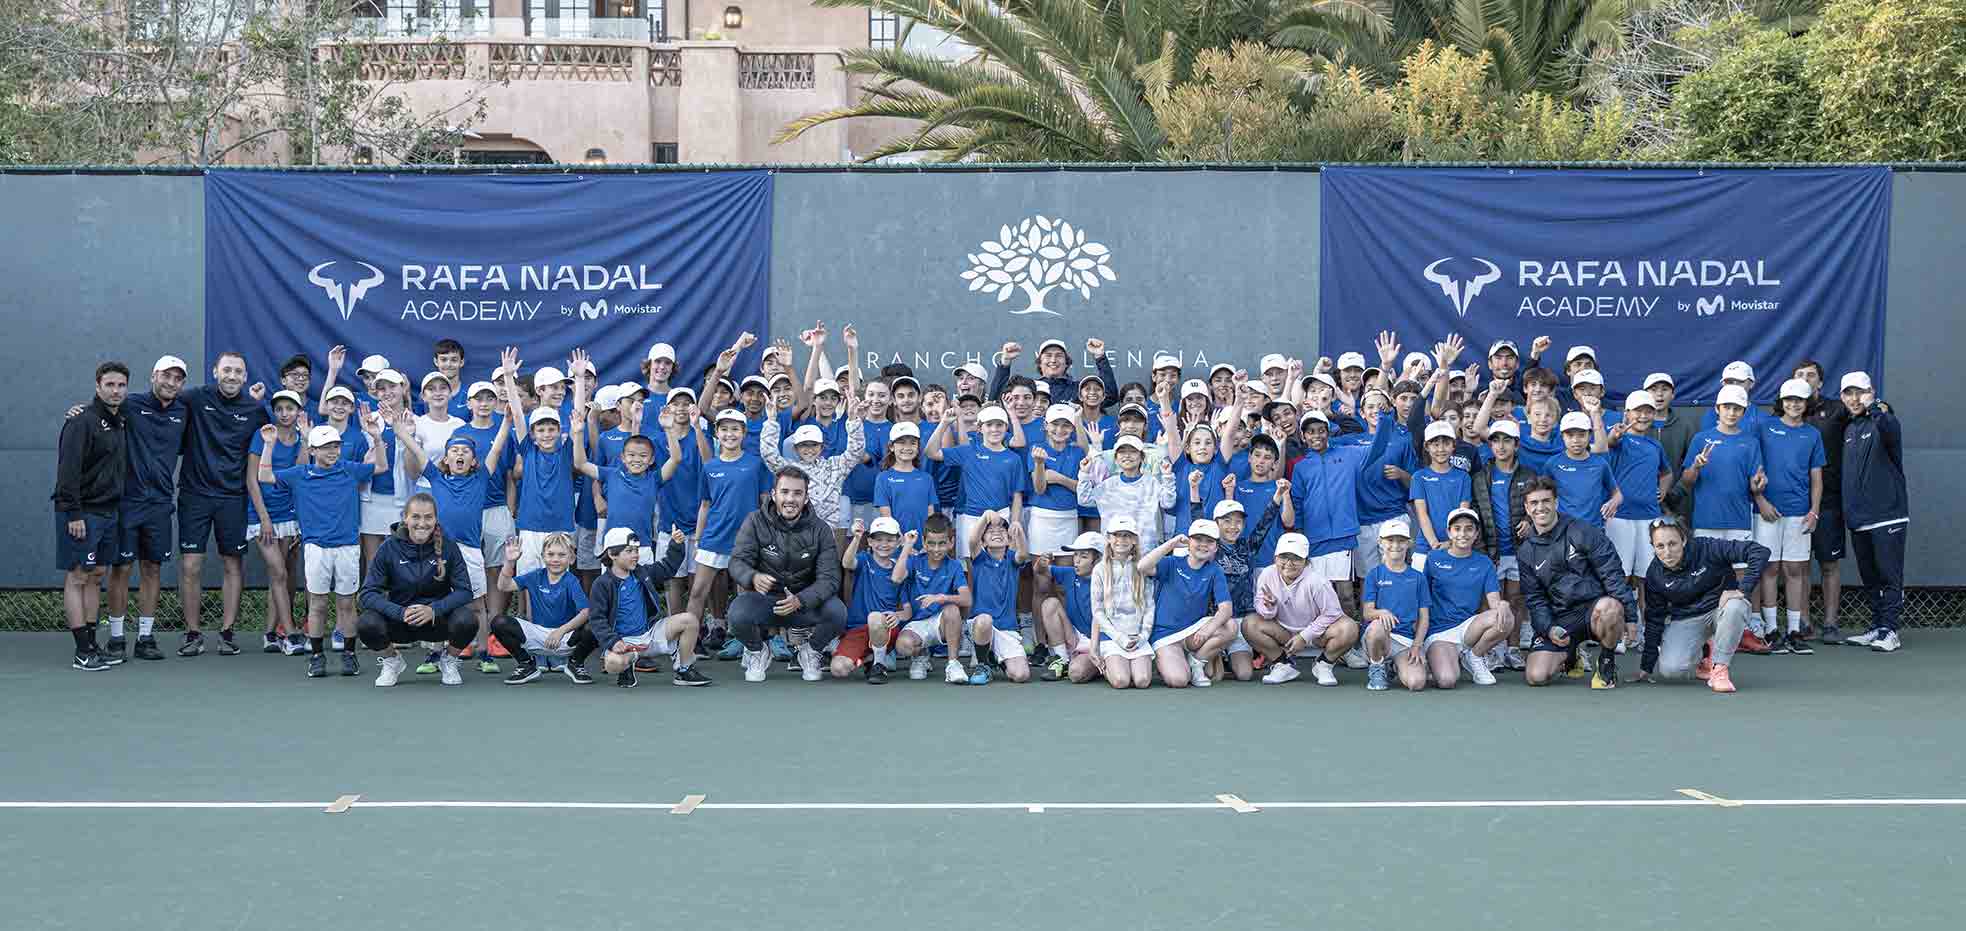 For the third consecutive year, Avanza will hold Rafa Nadal Academy by Movistar camps in the United States